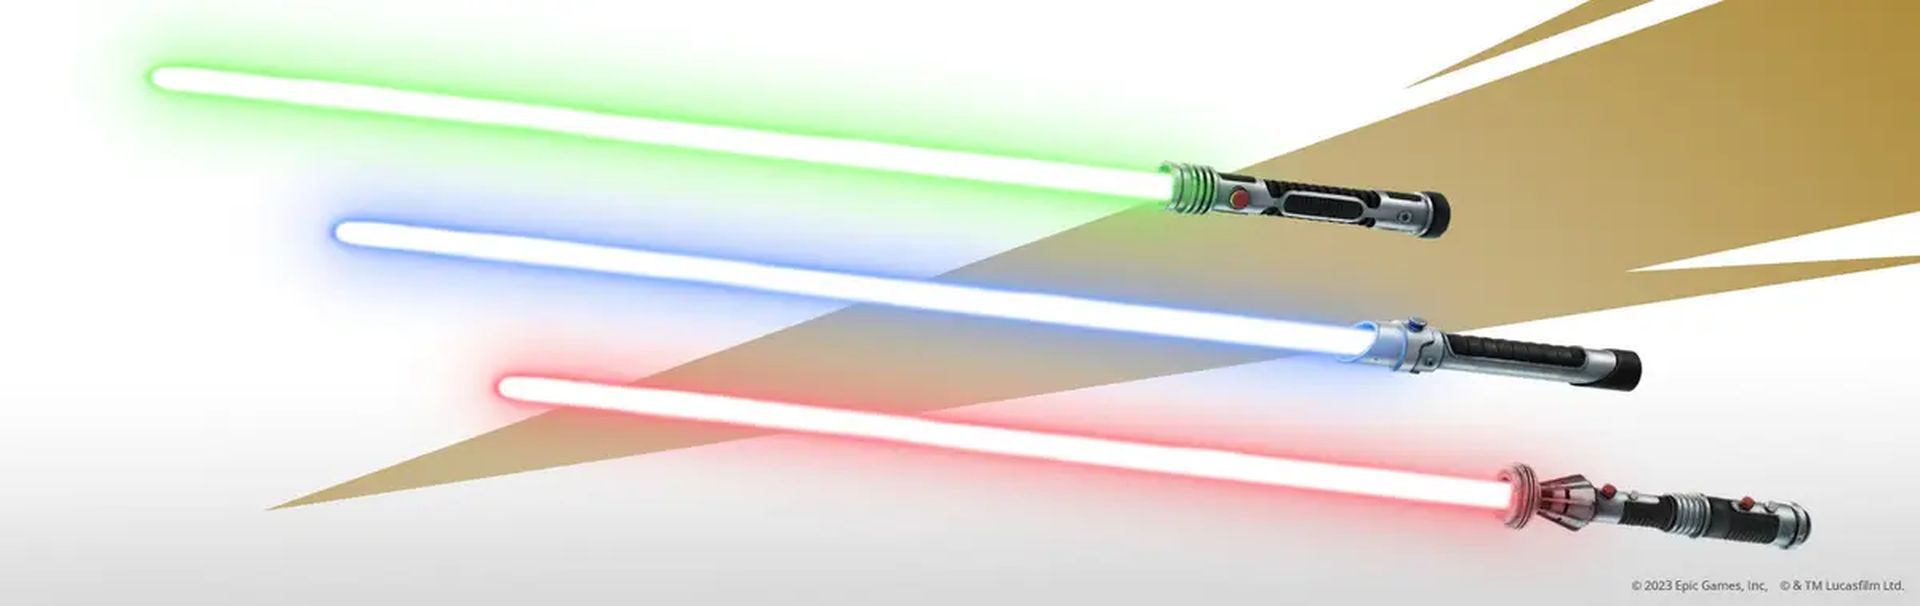 Where to find Lightsabers in Fortnite